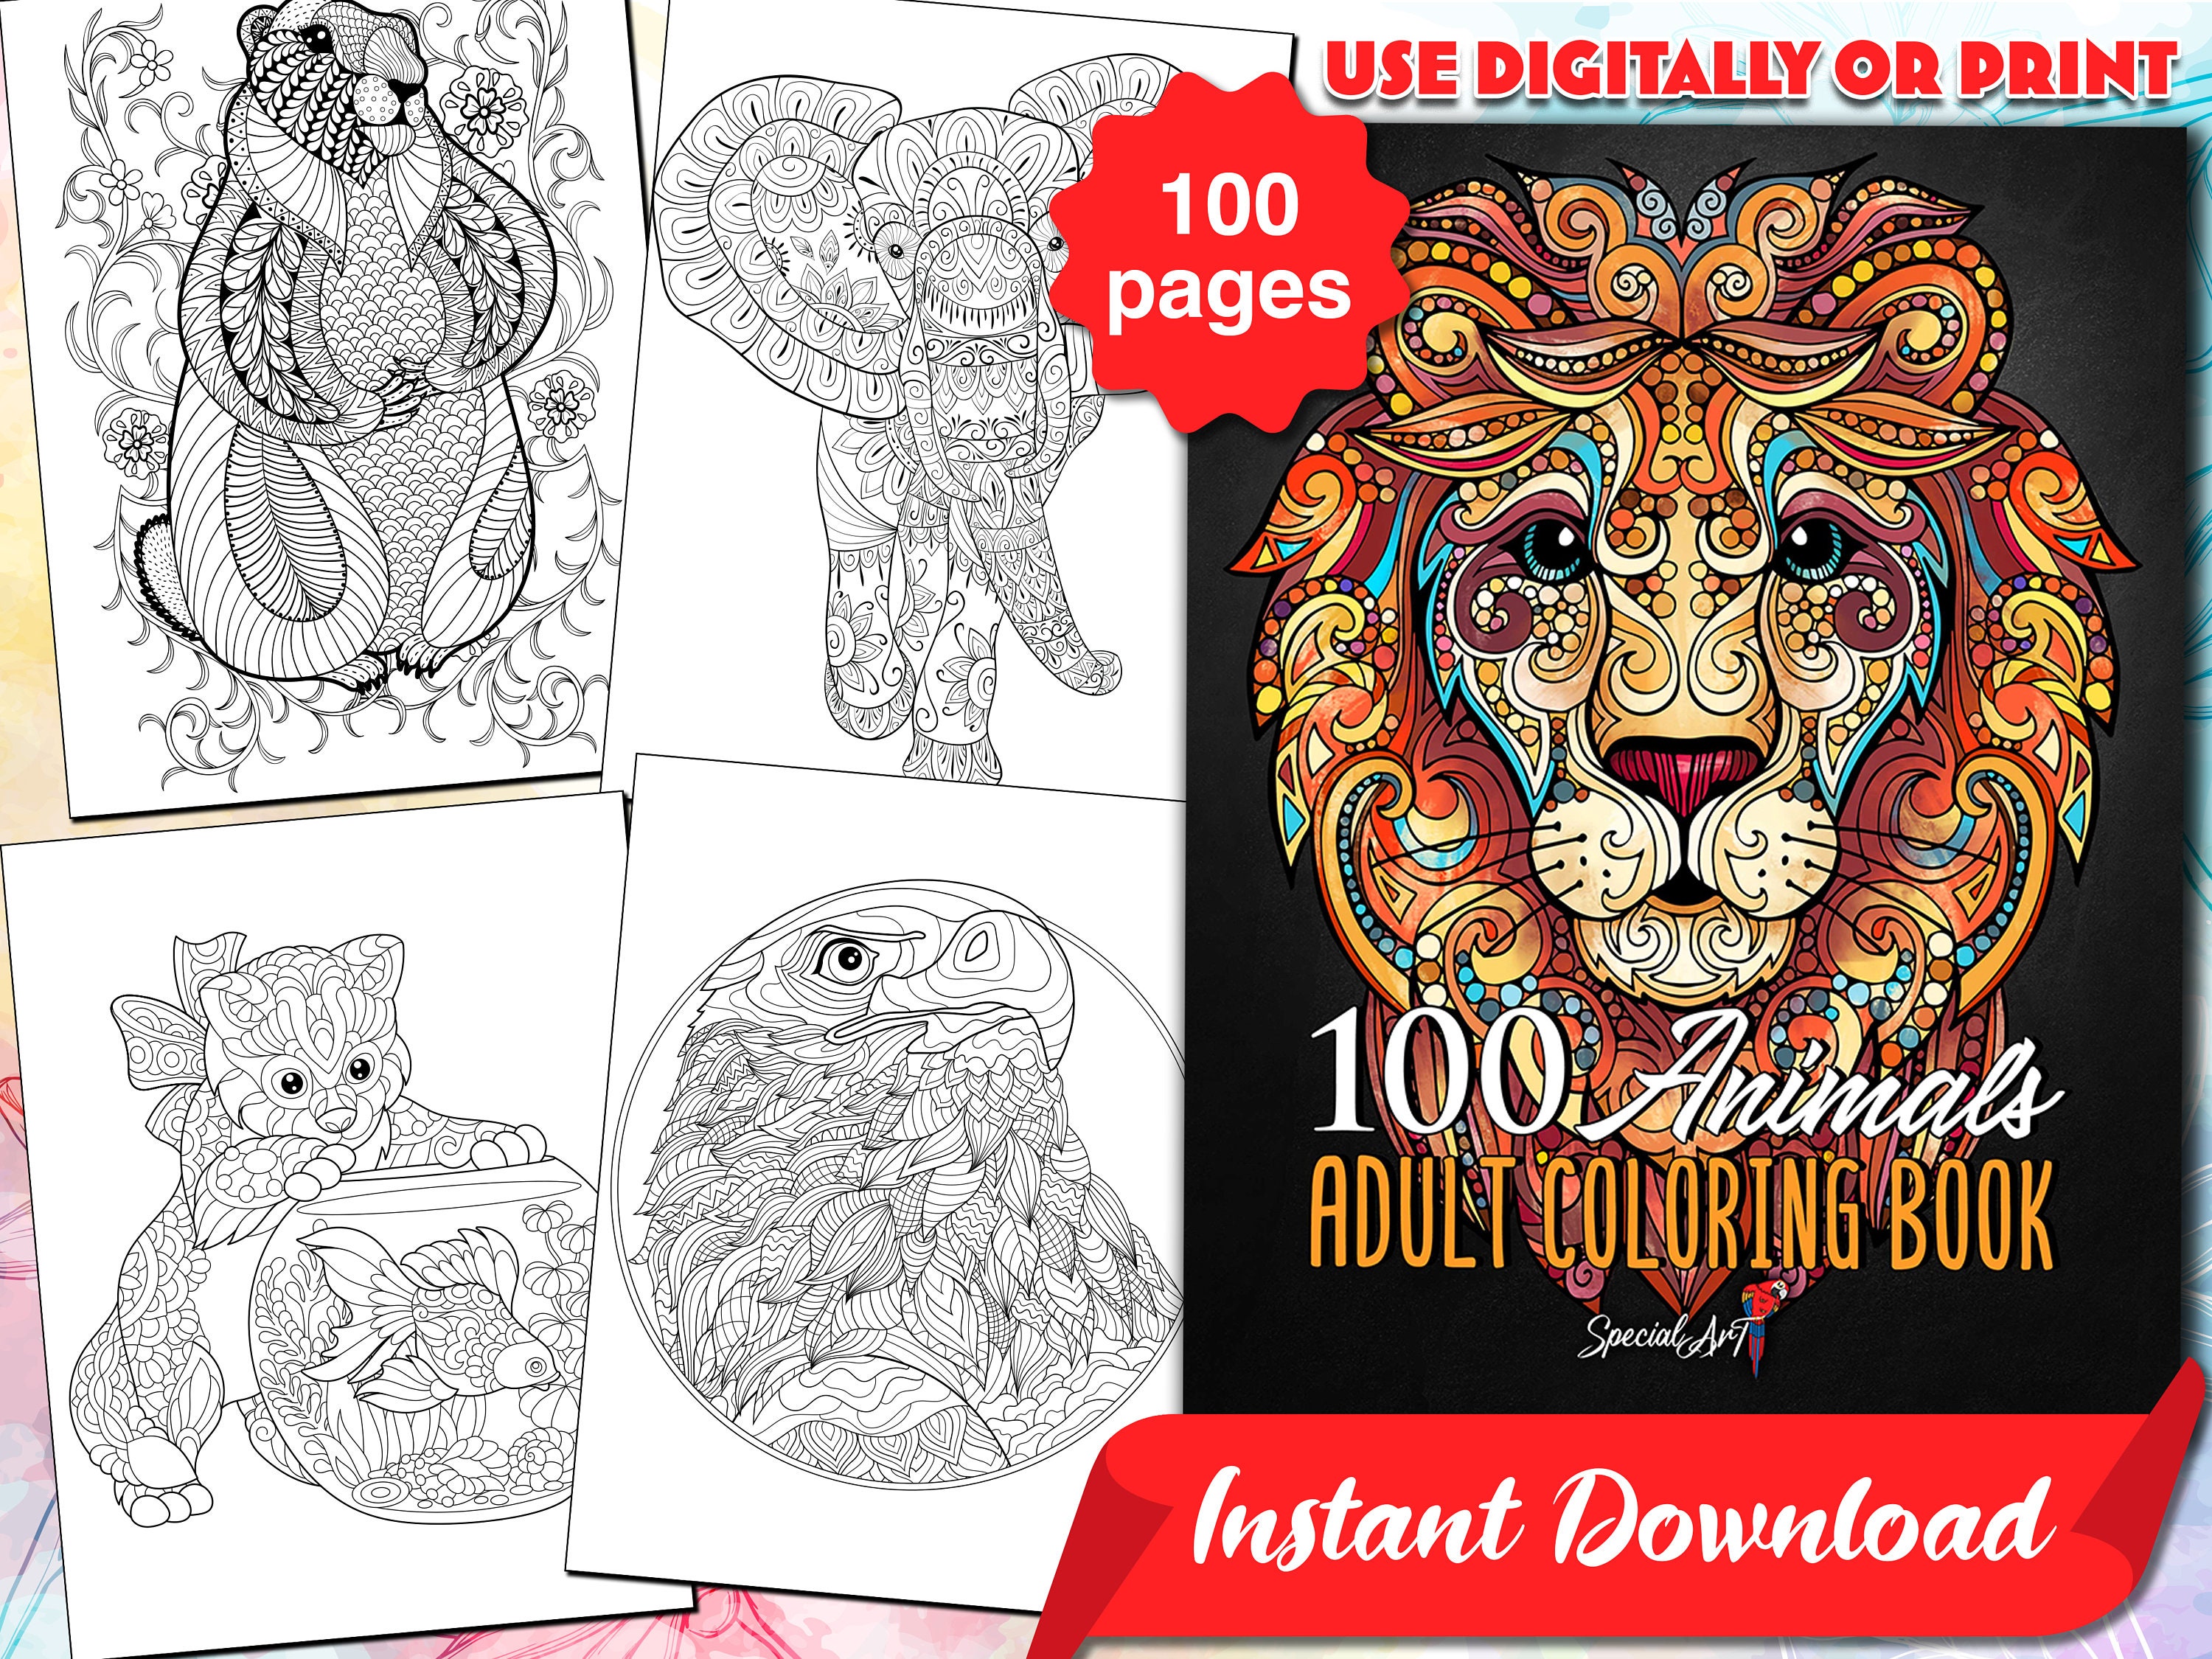 Adult Relaxation Coloring Book 200 Animals: Stress Relieving Animal Designs  200 Animals designs with Lions, dragons, butterfly, Elephants, Owls, Horse  (Paperback)